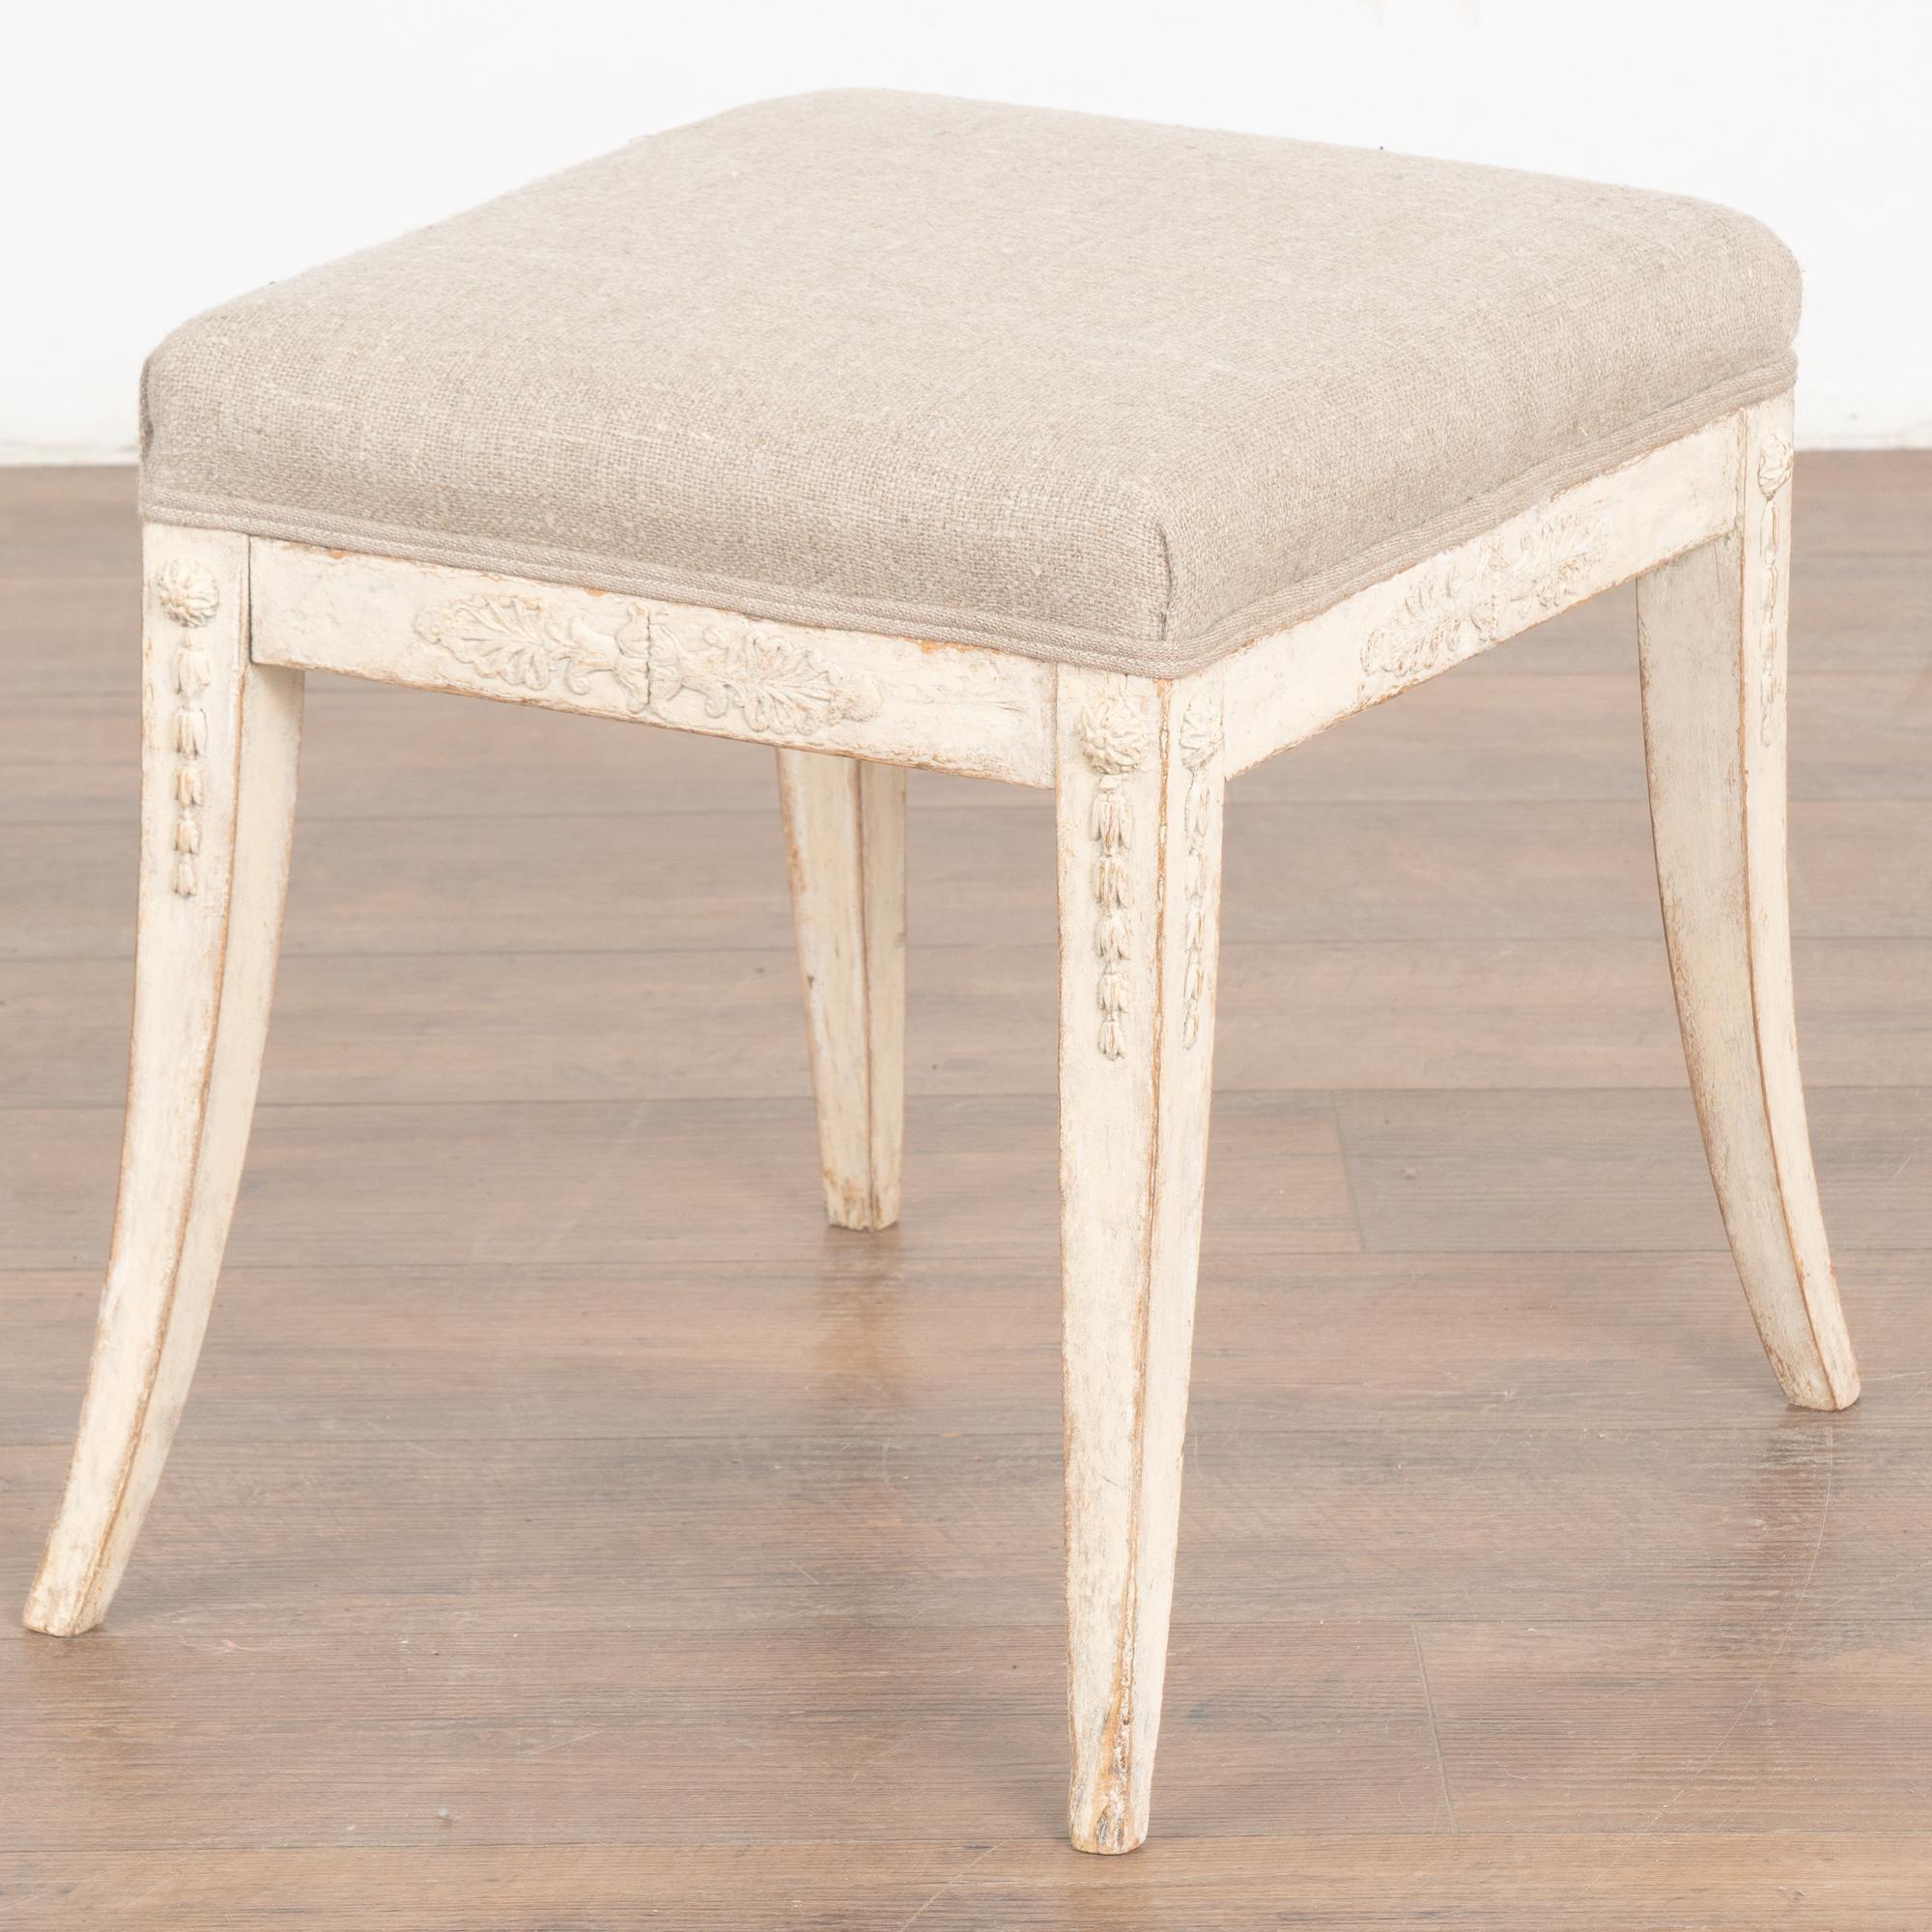 White Swedish Gustavian Stool With Saber Legs, circa 1840 For Sale 4